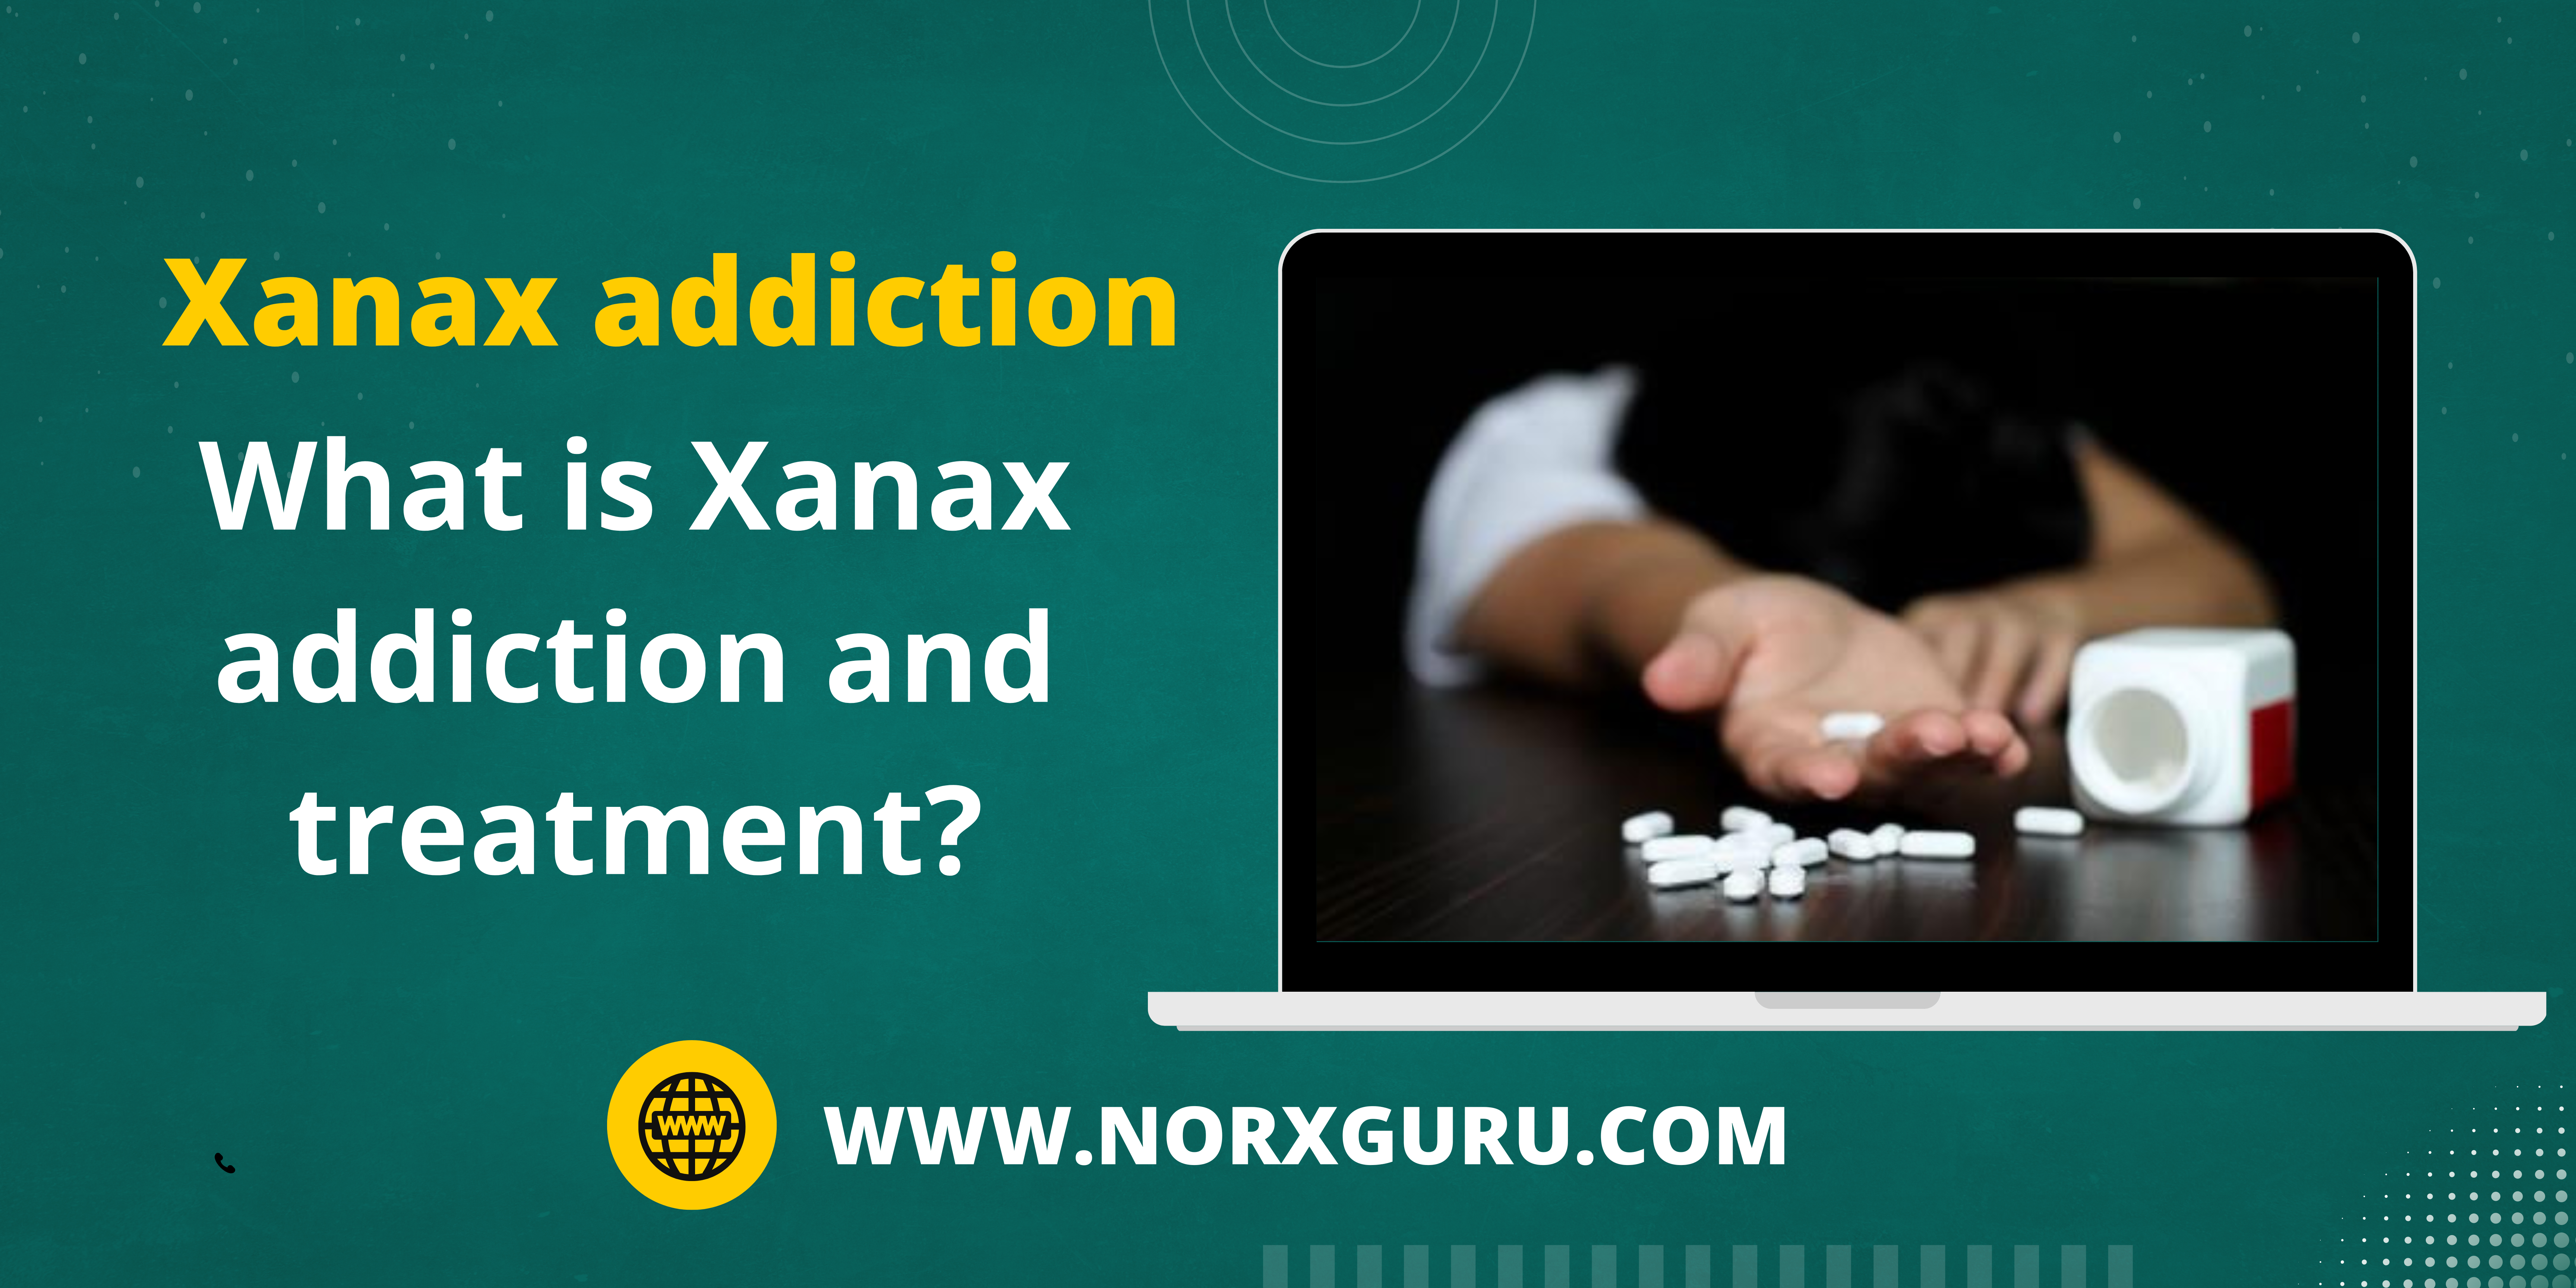 What is Xanax addiction and treatment?